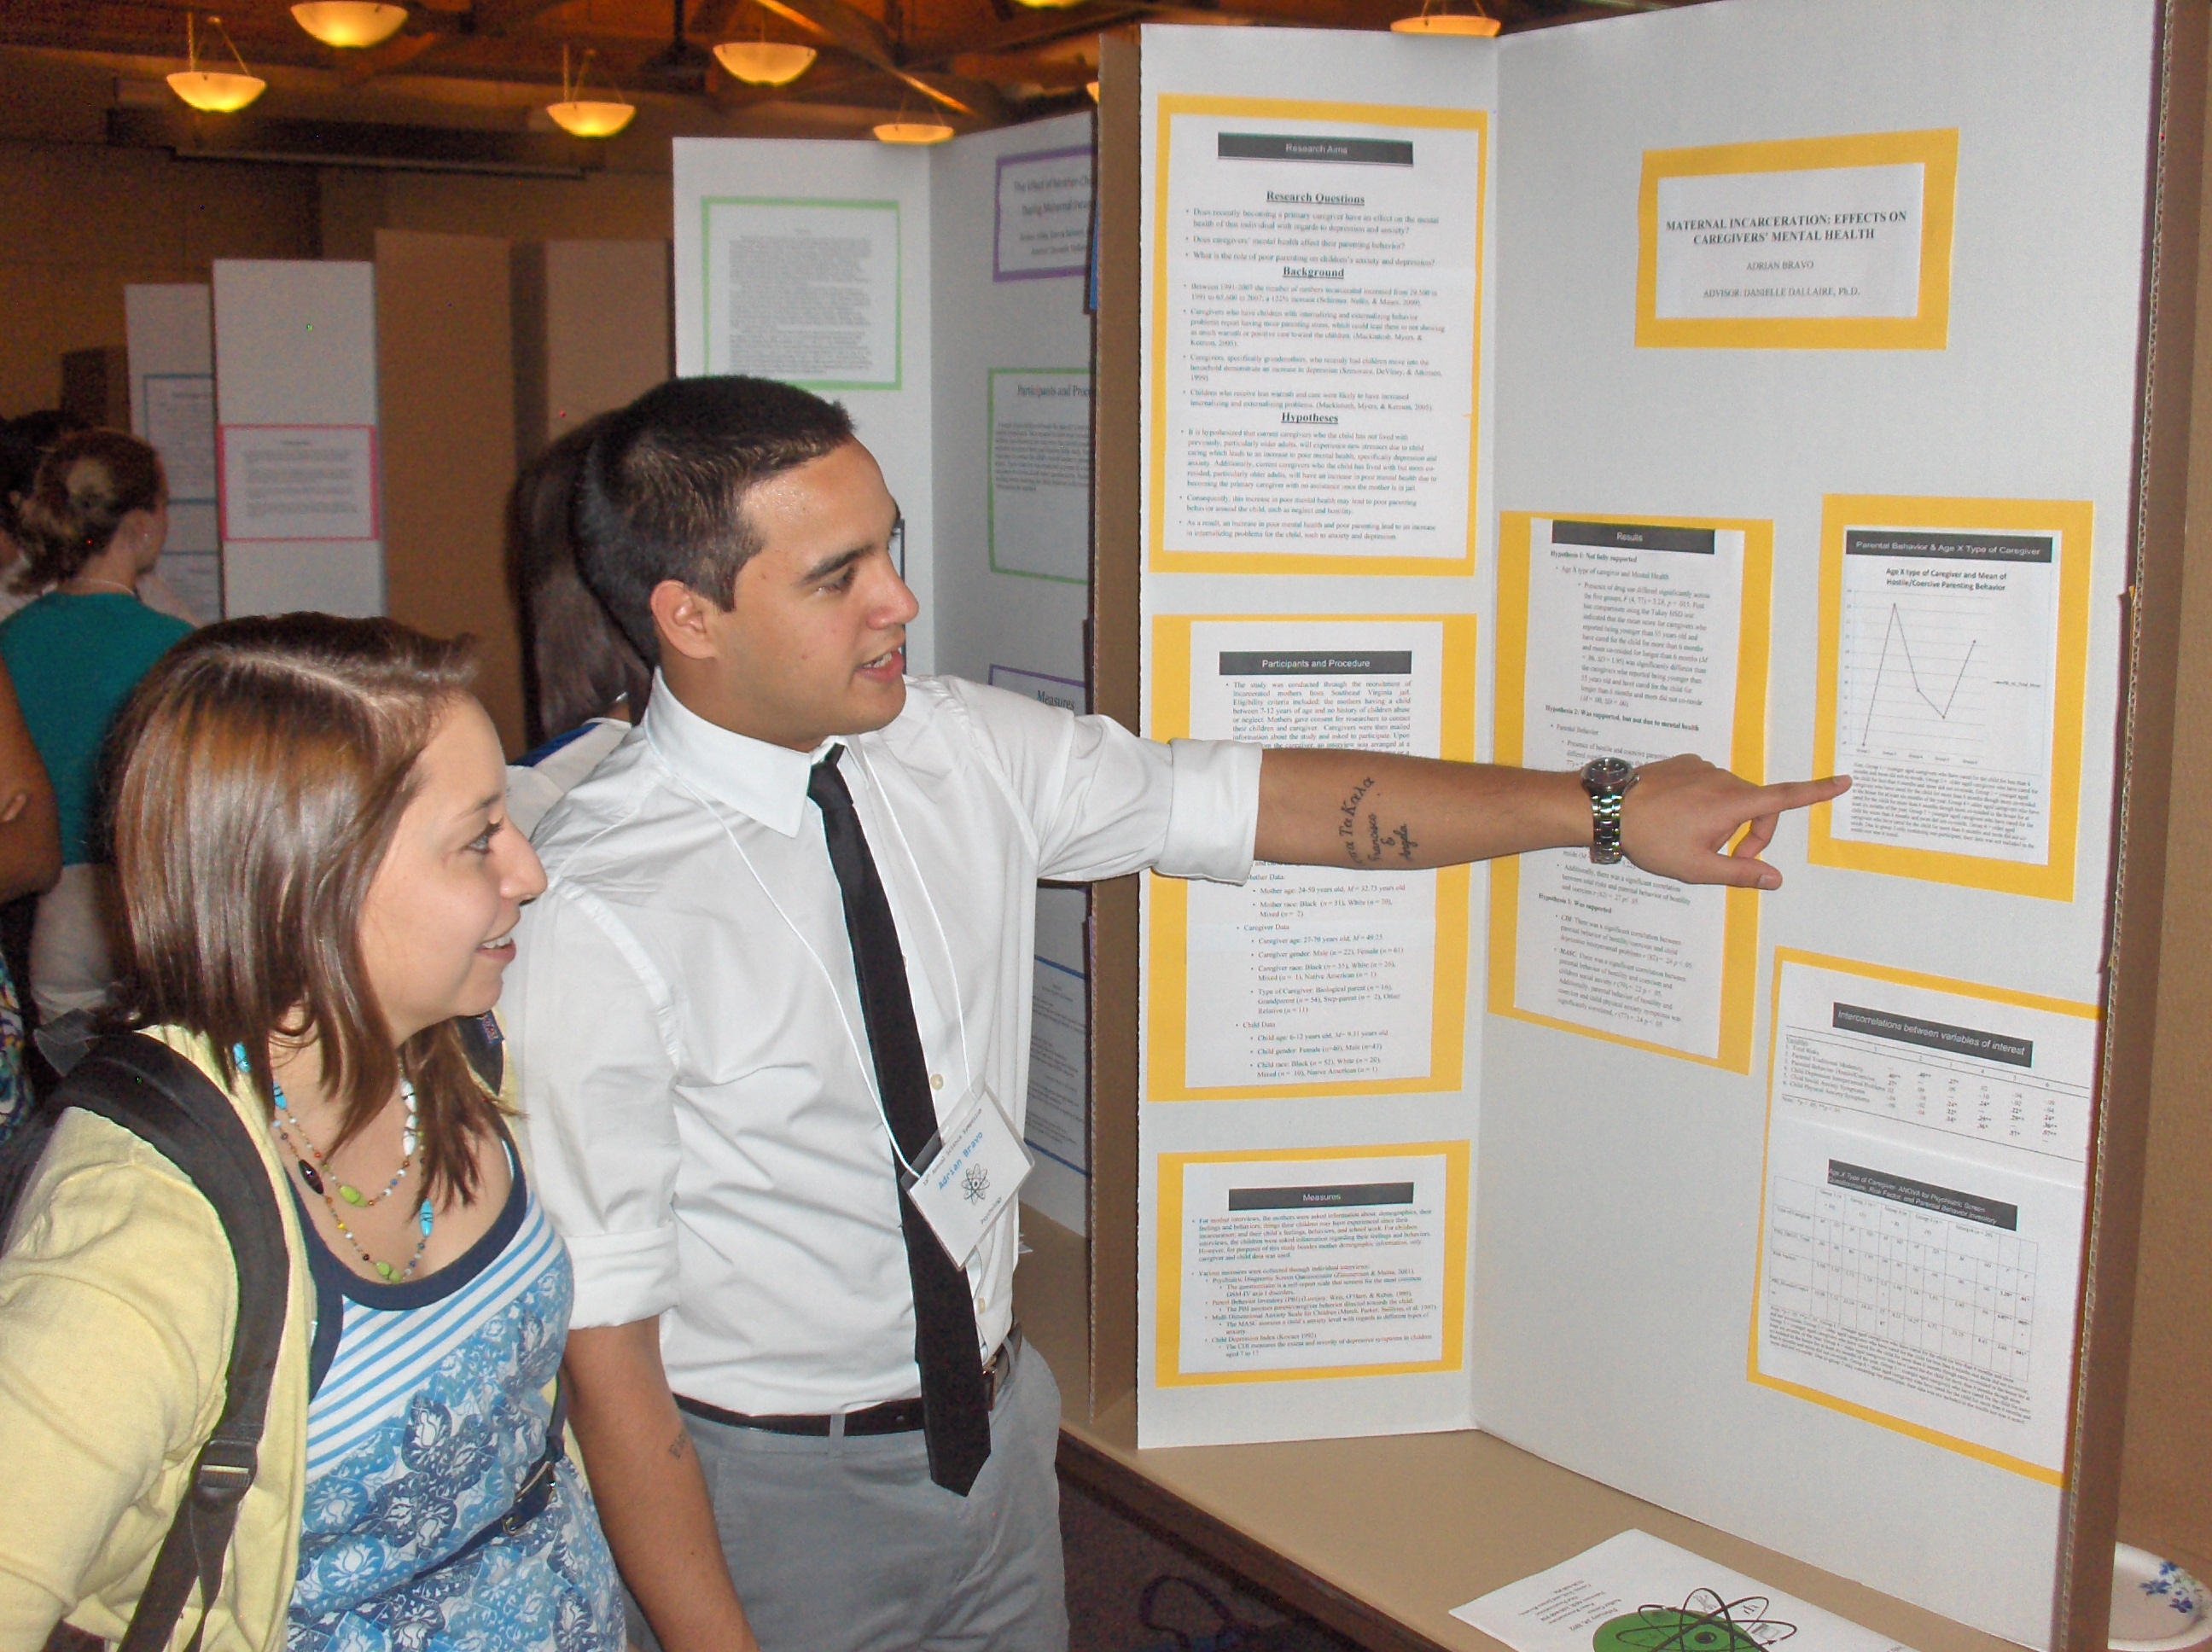 Adrian Bravo shows a friend his poster on Maternal Incarceration Effects on Caregivers' Mental Health